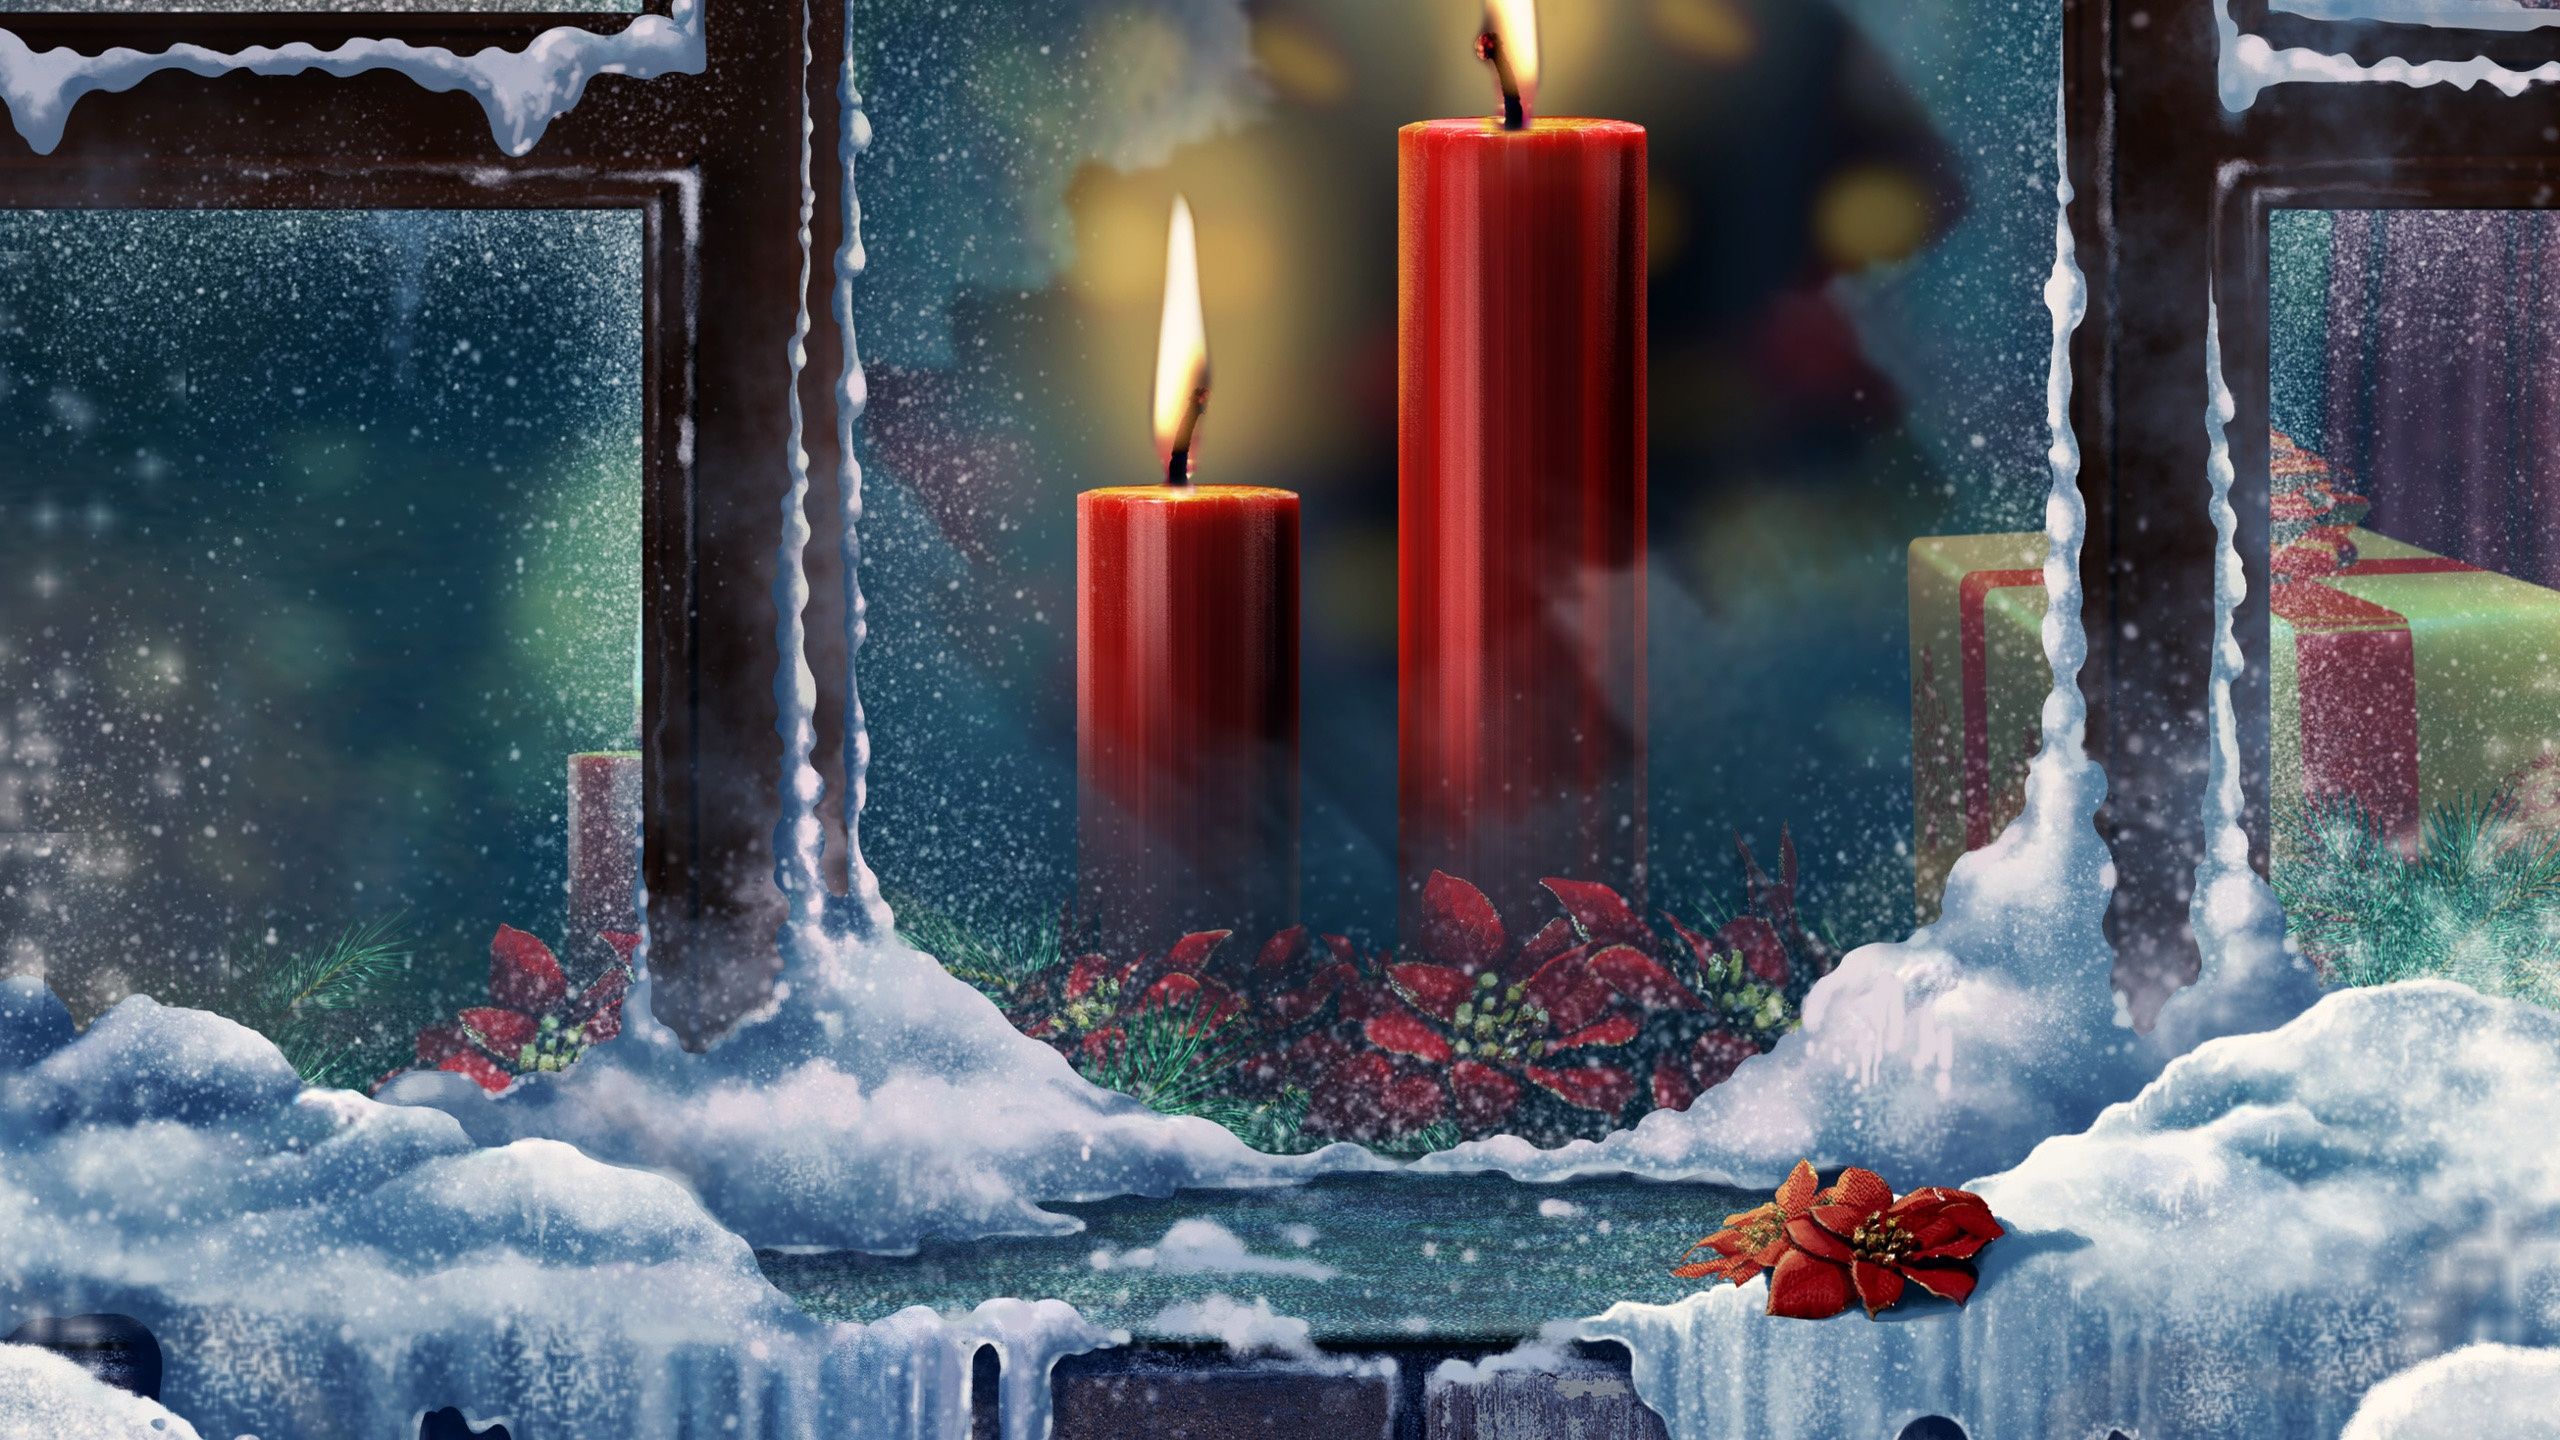 Burning candles outside the window on Christmas wallpapers and images